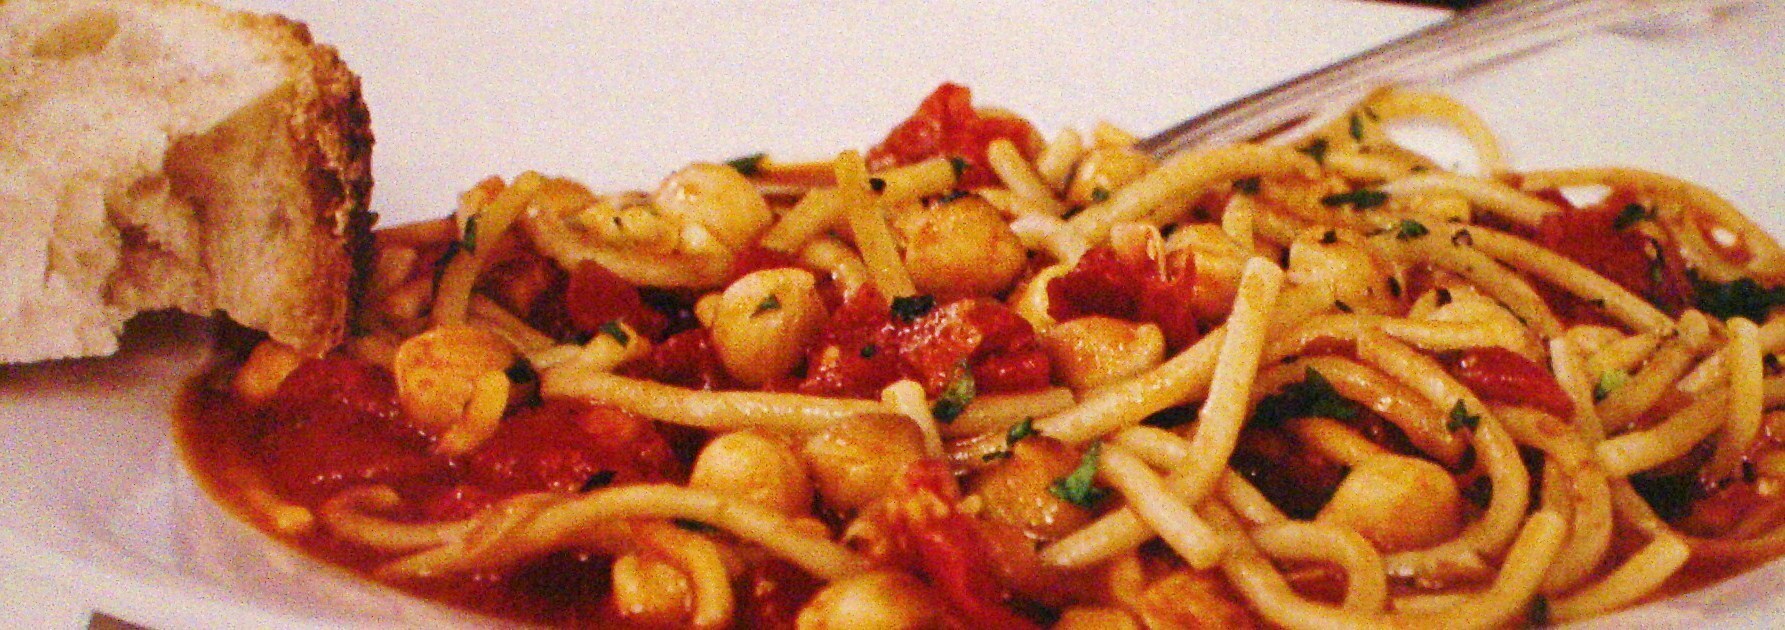 Download this Italian Food Pasta Cheech picture